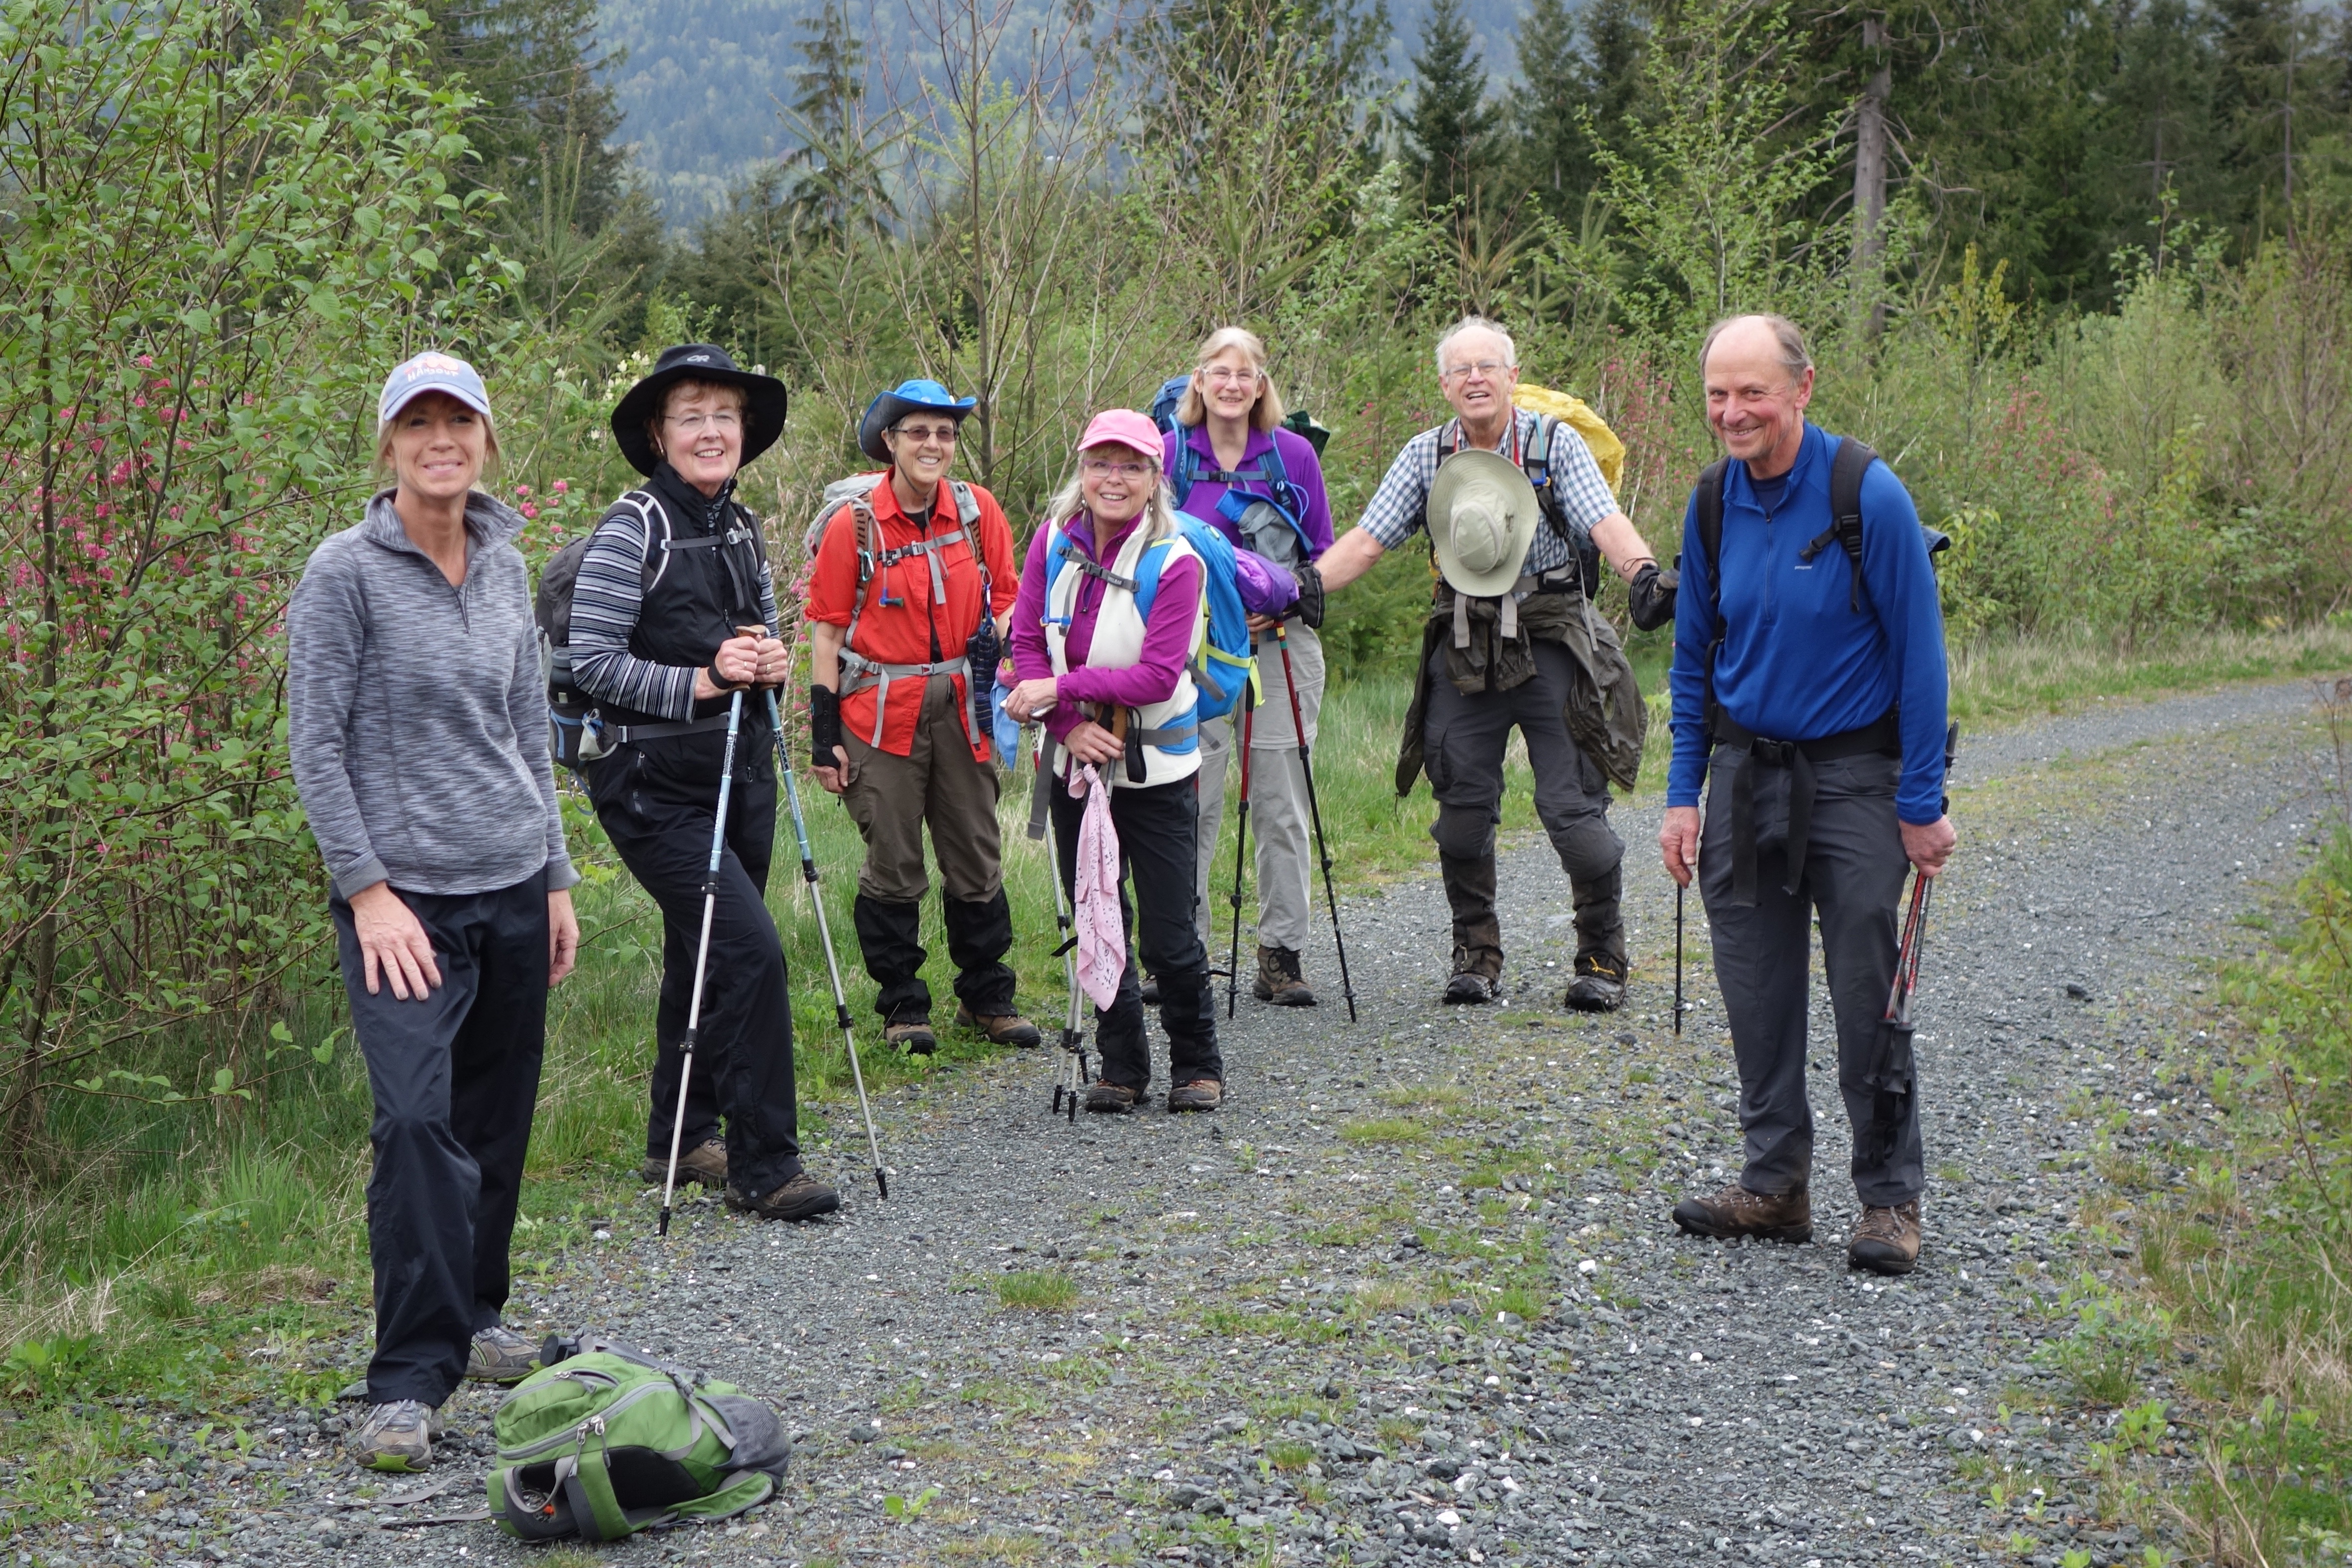 Hikers of a Certain Age: How to Keep Hiking